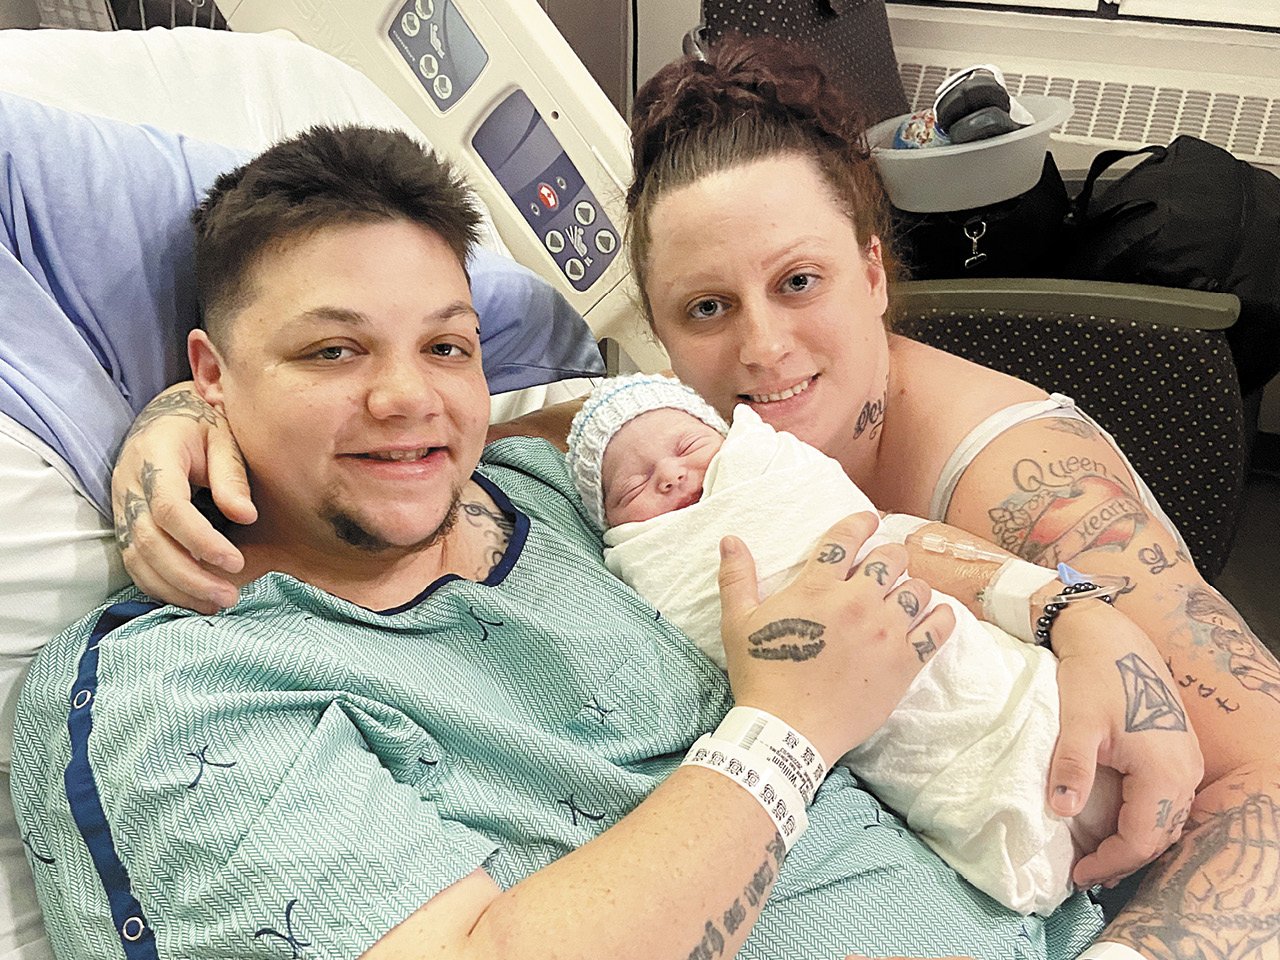 William and Chastin Carriere with baby Carter. The couple worked with three donors from various online groups before conceiving. 